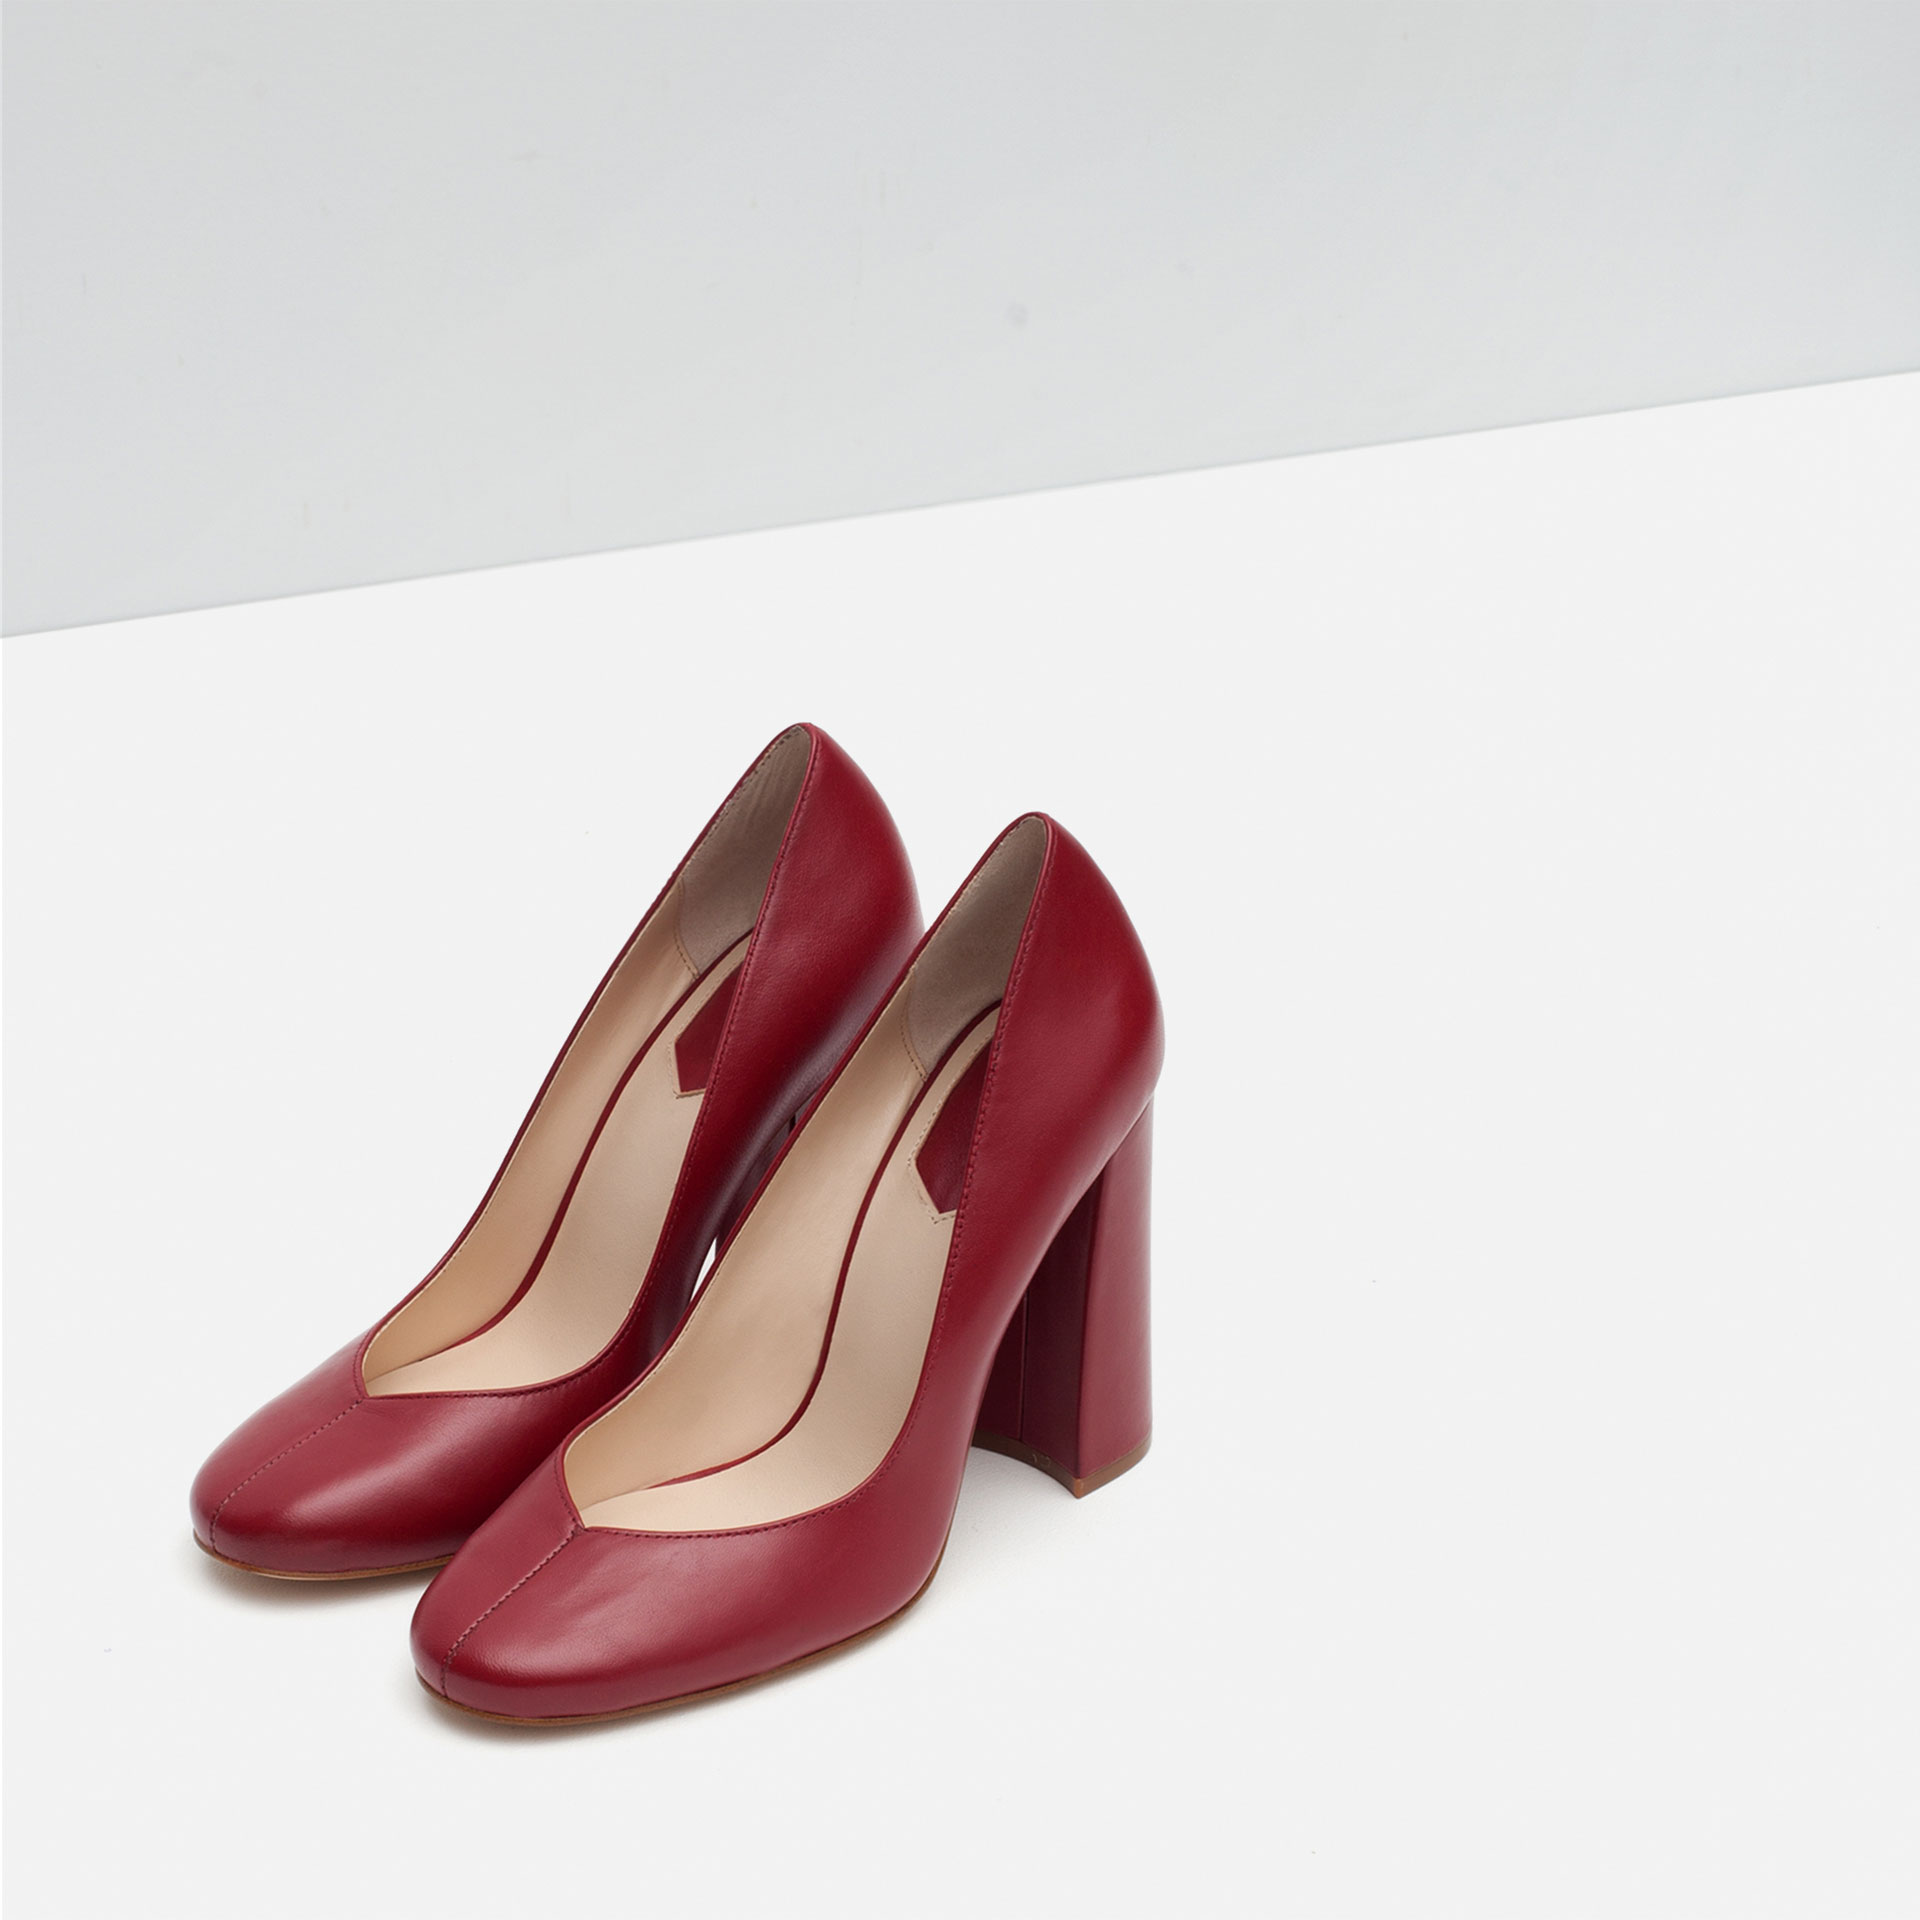  A rich shade of oxblood pairs pretty with the foliage still sprinkled across the city streets.  Zara block heel leather heels, $89.90, at  Zara.&nbsp;   